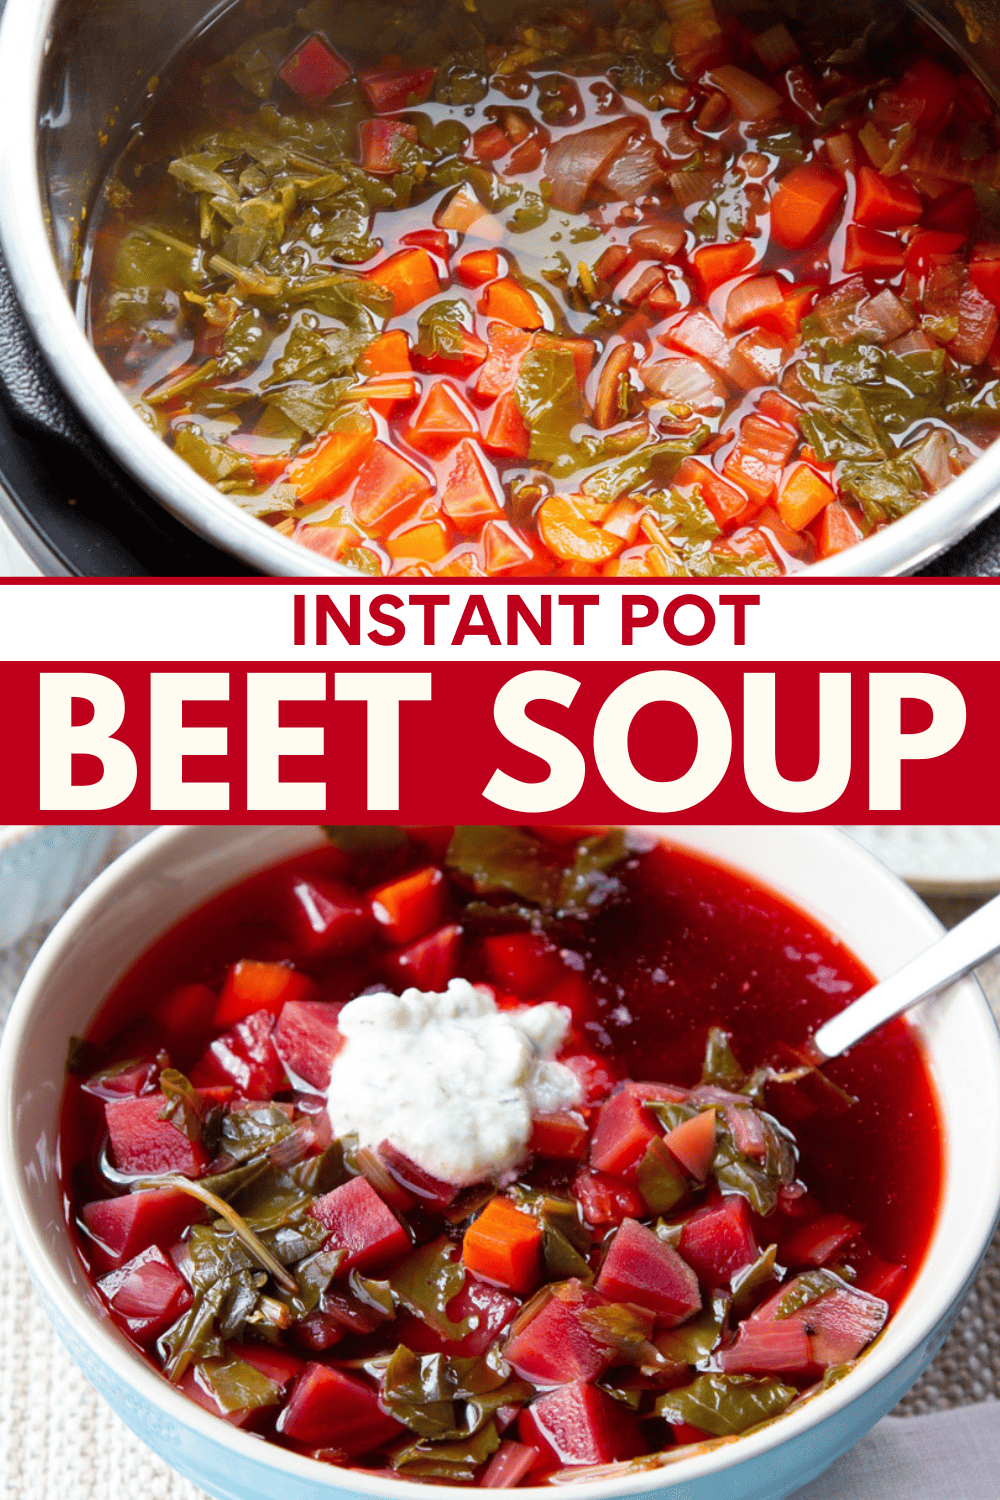 Beet Soup With Greens (Instant Pot)